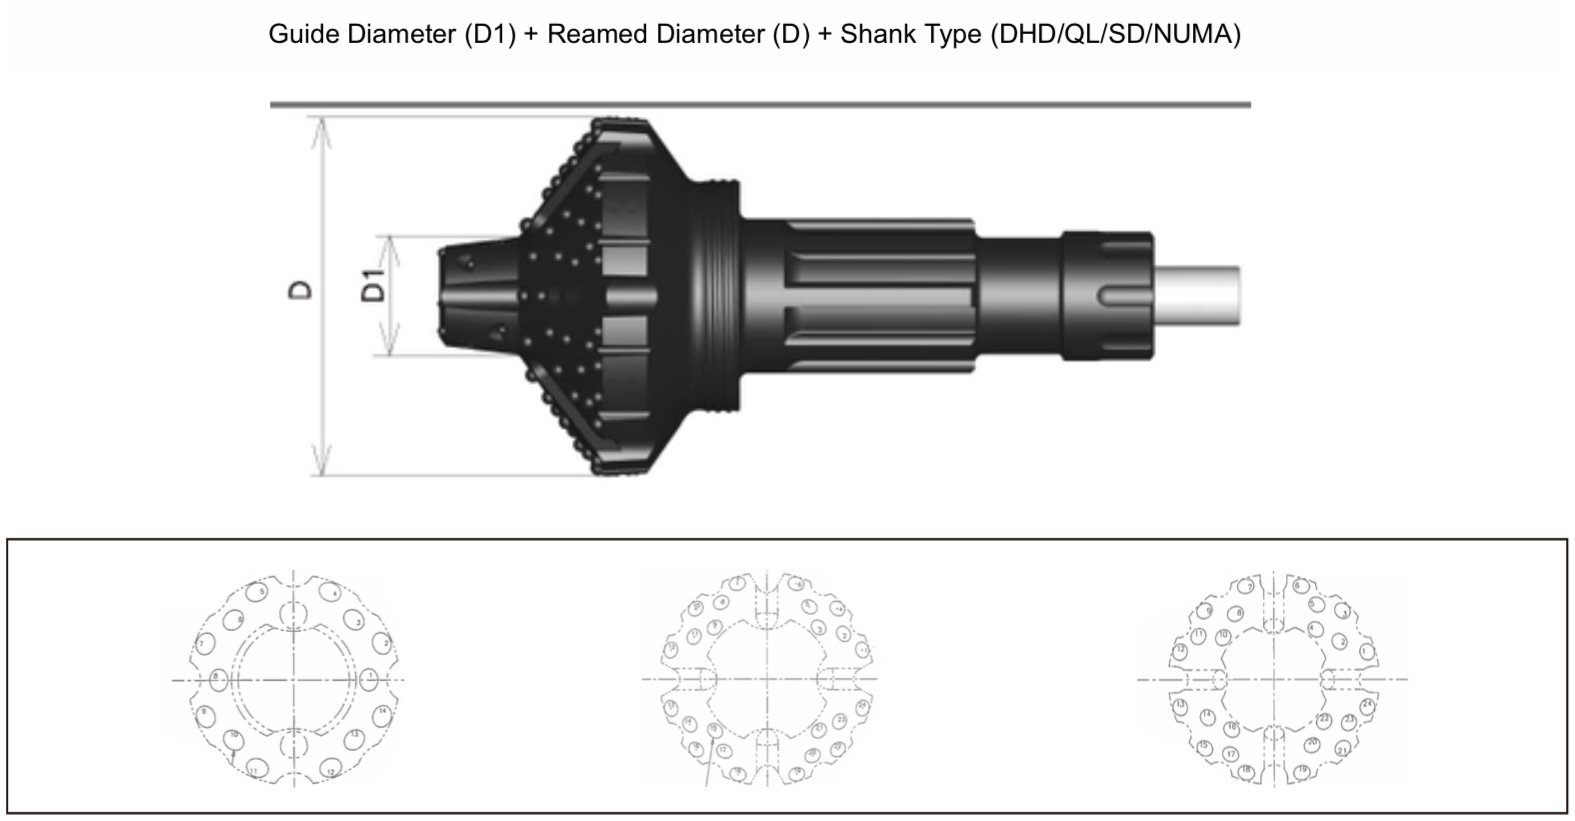 Black Diamond Drilling DTH Down the Hole Hole opener ordering guide